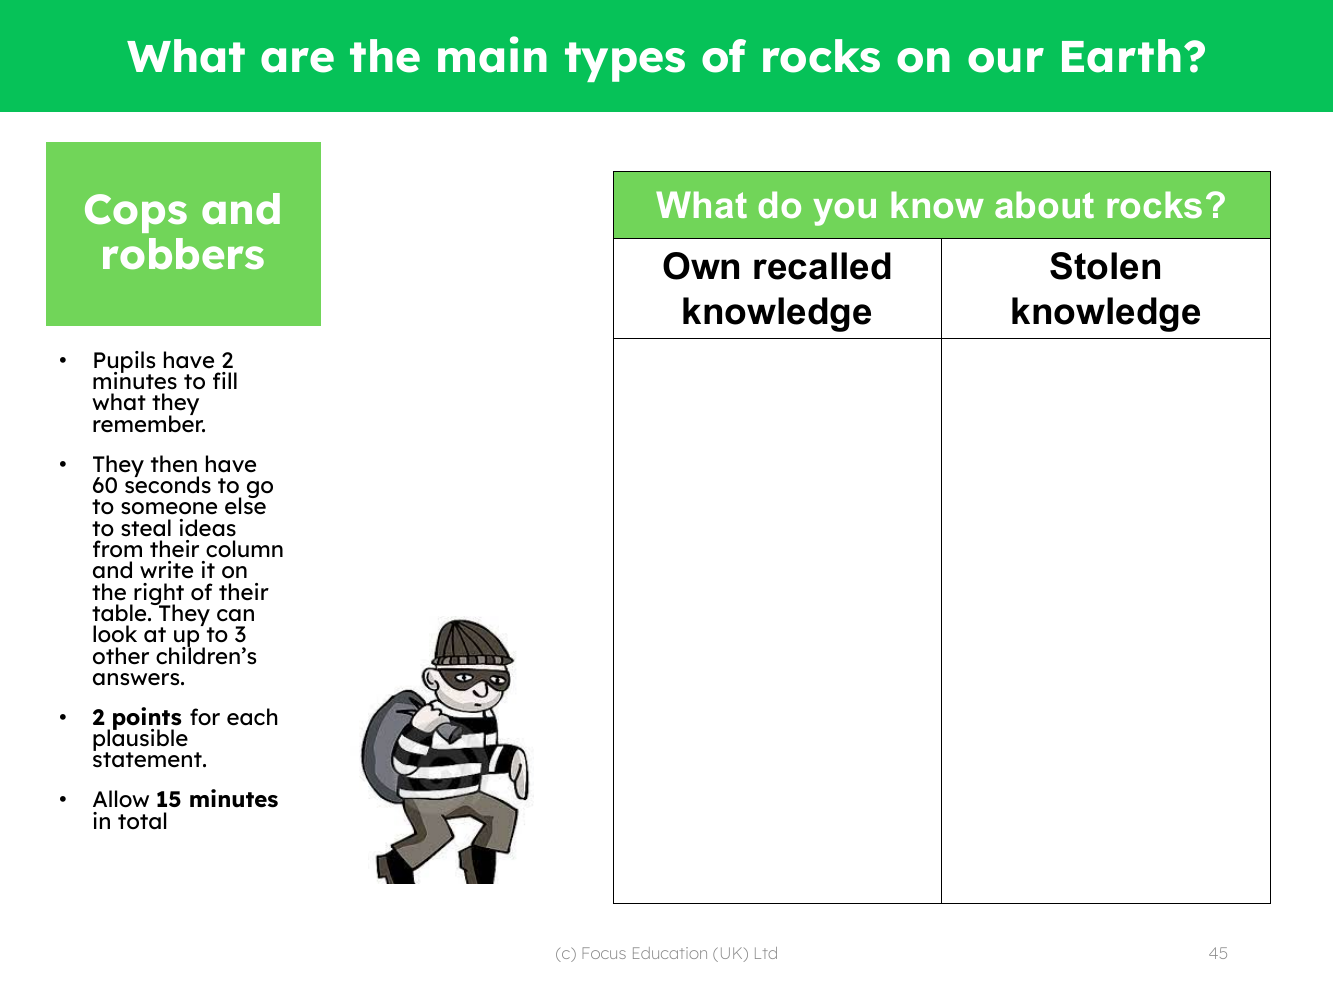 Cops and robbers - What do you know about rocks?